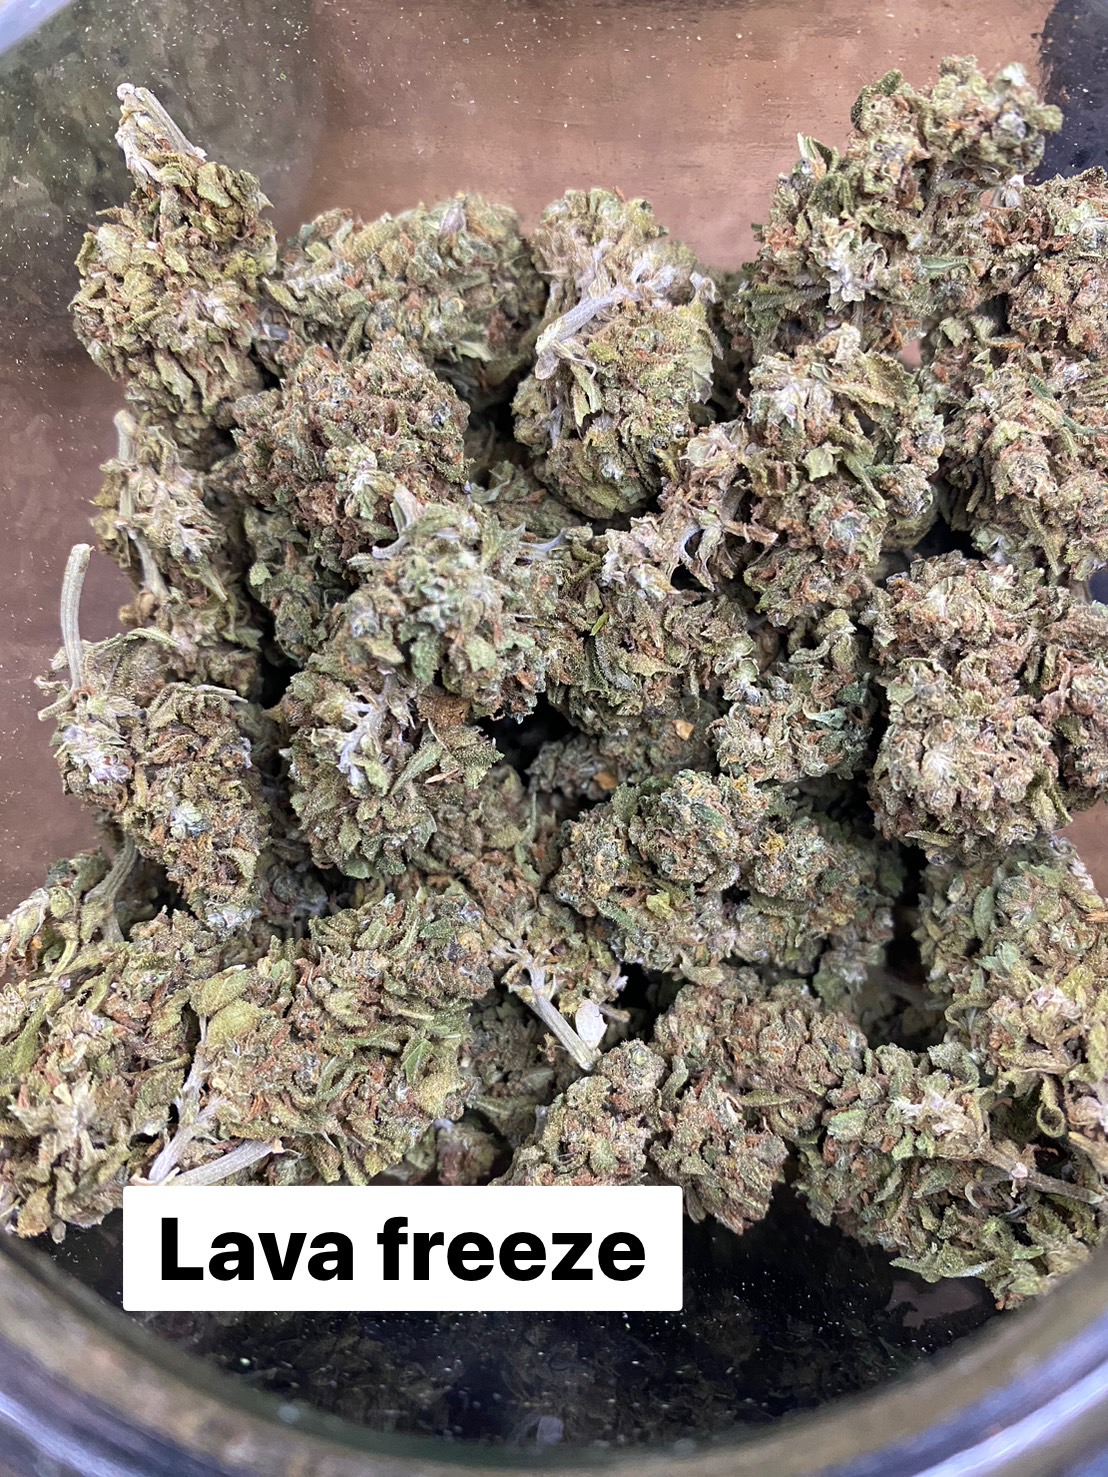 Product Image for Lava Freeze